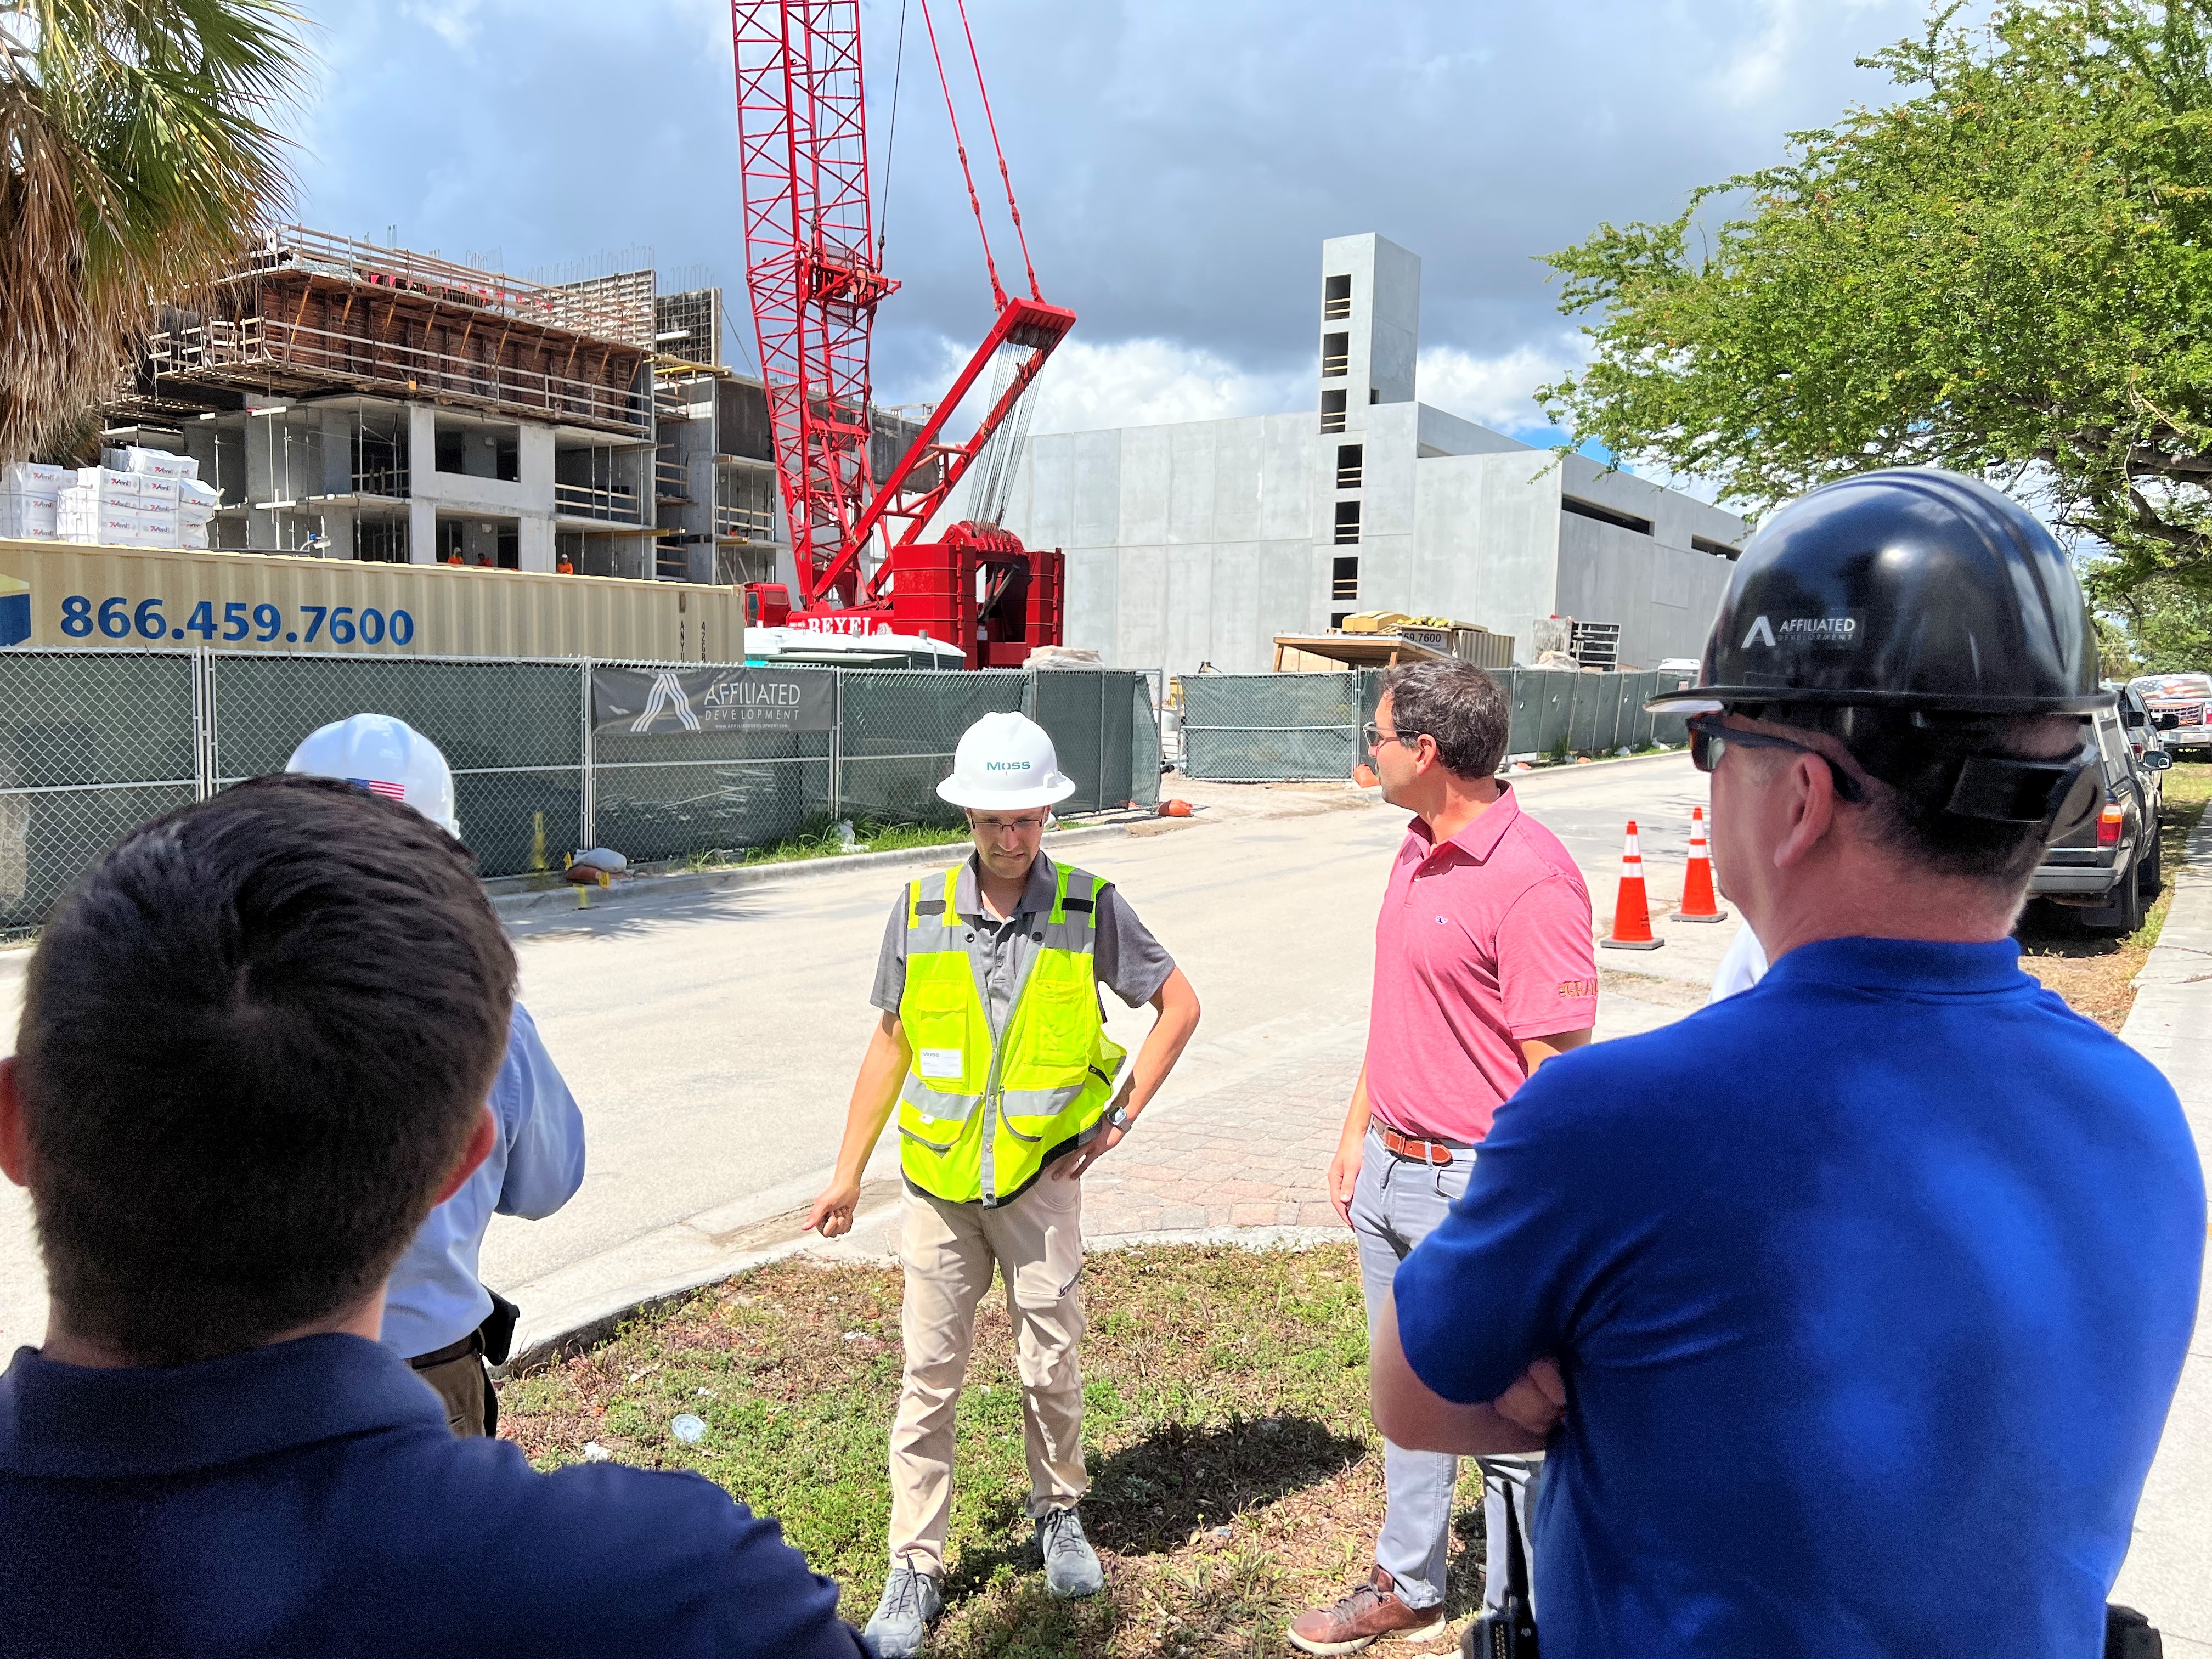 May 13th, 2022: The Board of Trustees toured 'The Grand' in WPB. The Plan has invested in this project which will bring much needed workforce housing to our first responders. The project by Affiliated Development should be complete in March of 2023. Nick Rojo, President of Affiliated led the tour (pictured in red shirt). To learn more please visit: http://affiliateddevelopment.com/properties.